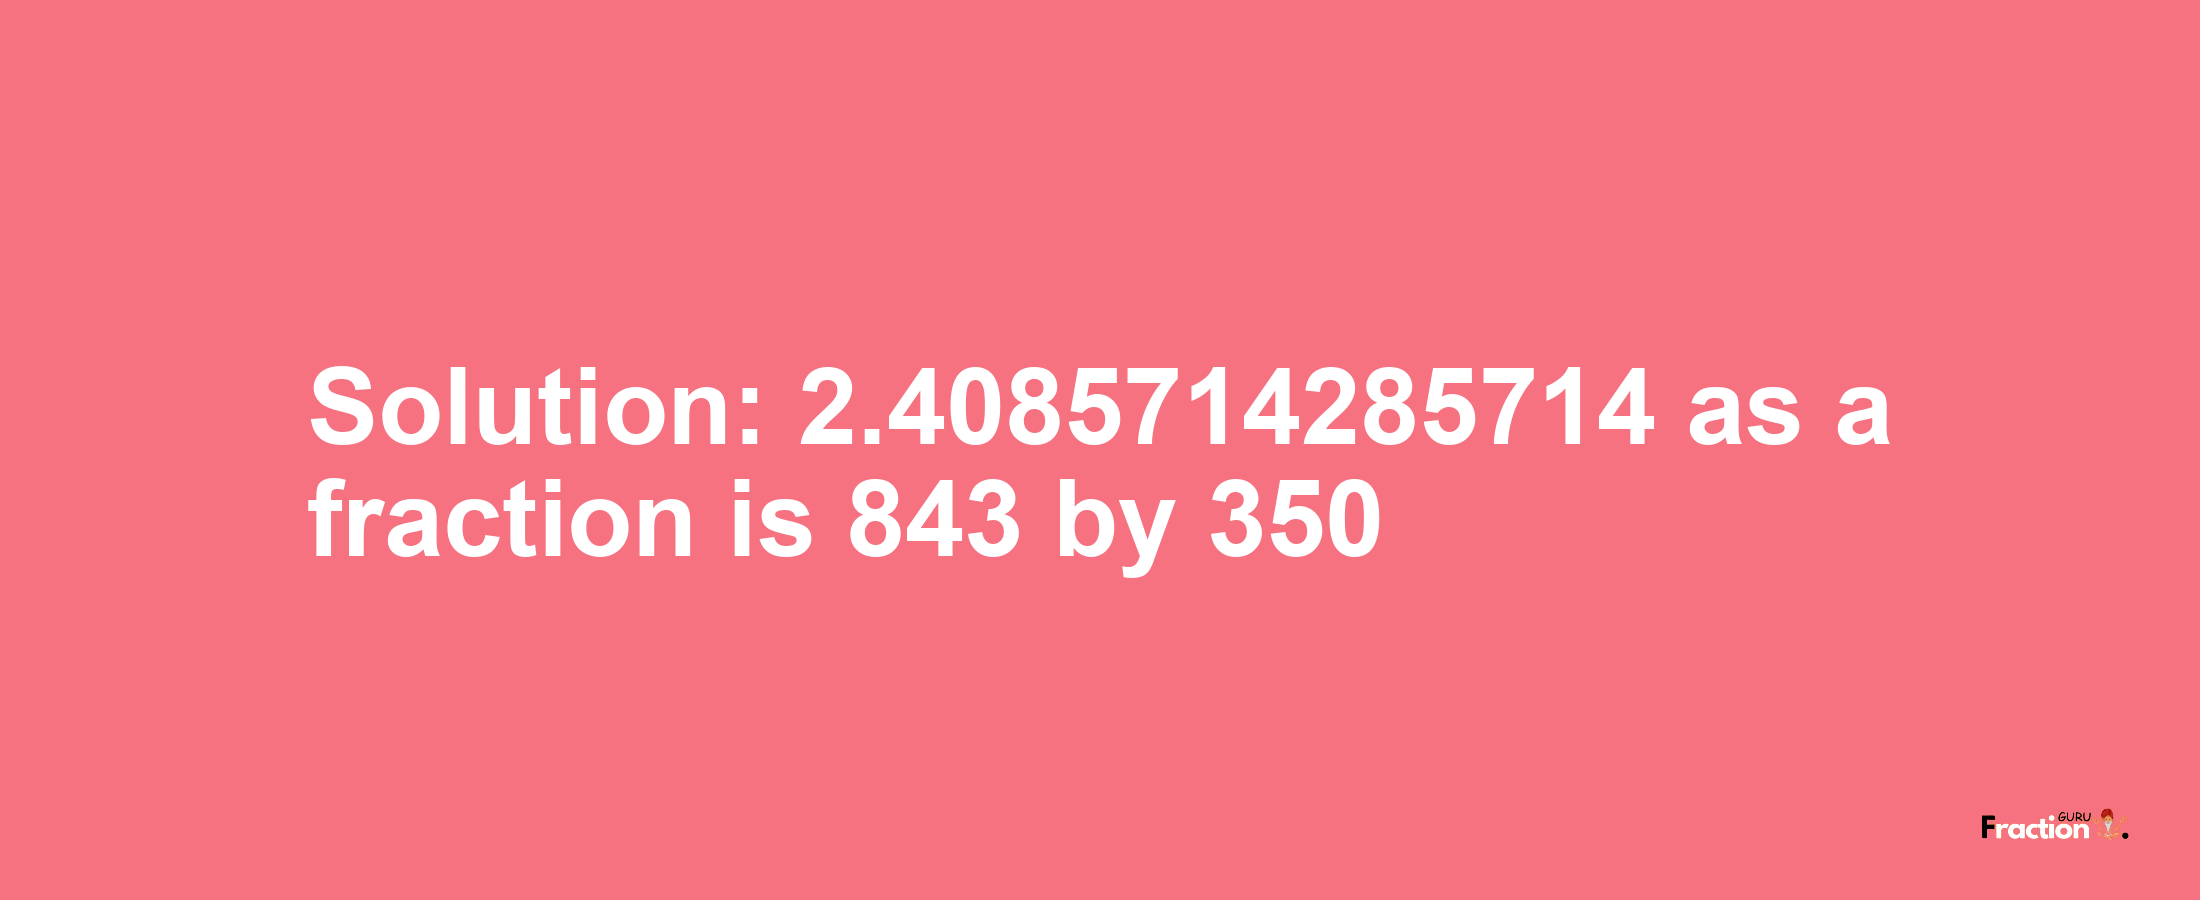 Solution:2.4085714285714 as a fraction is 843/350